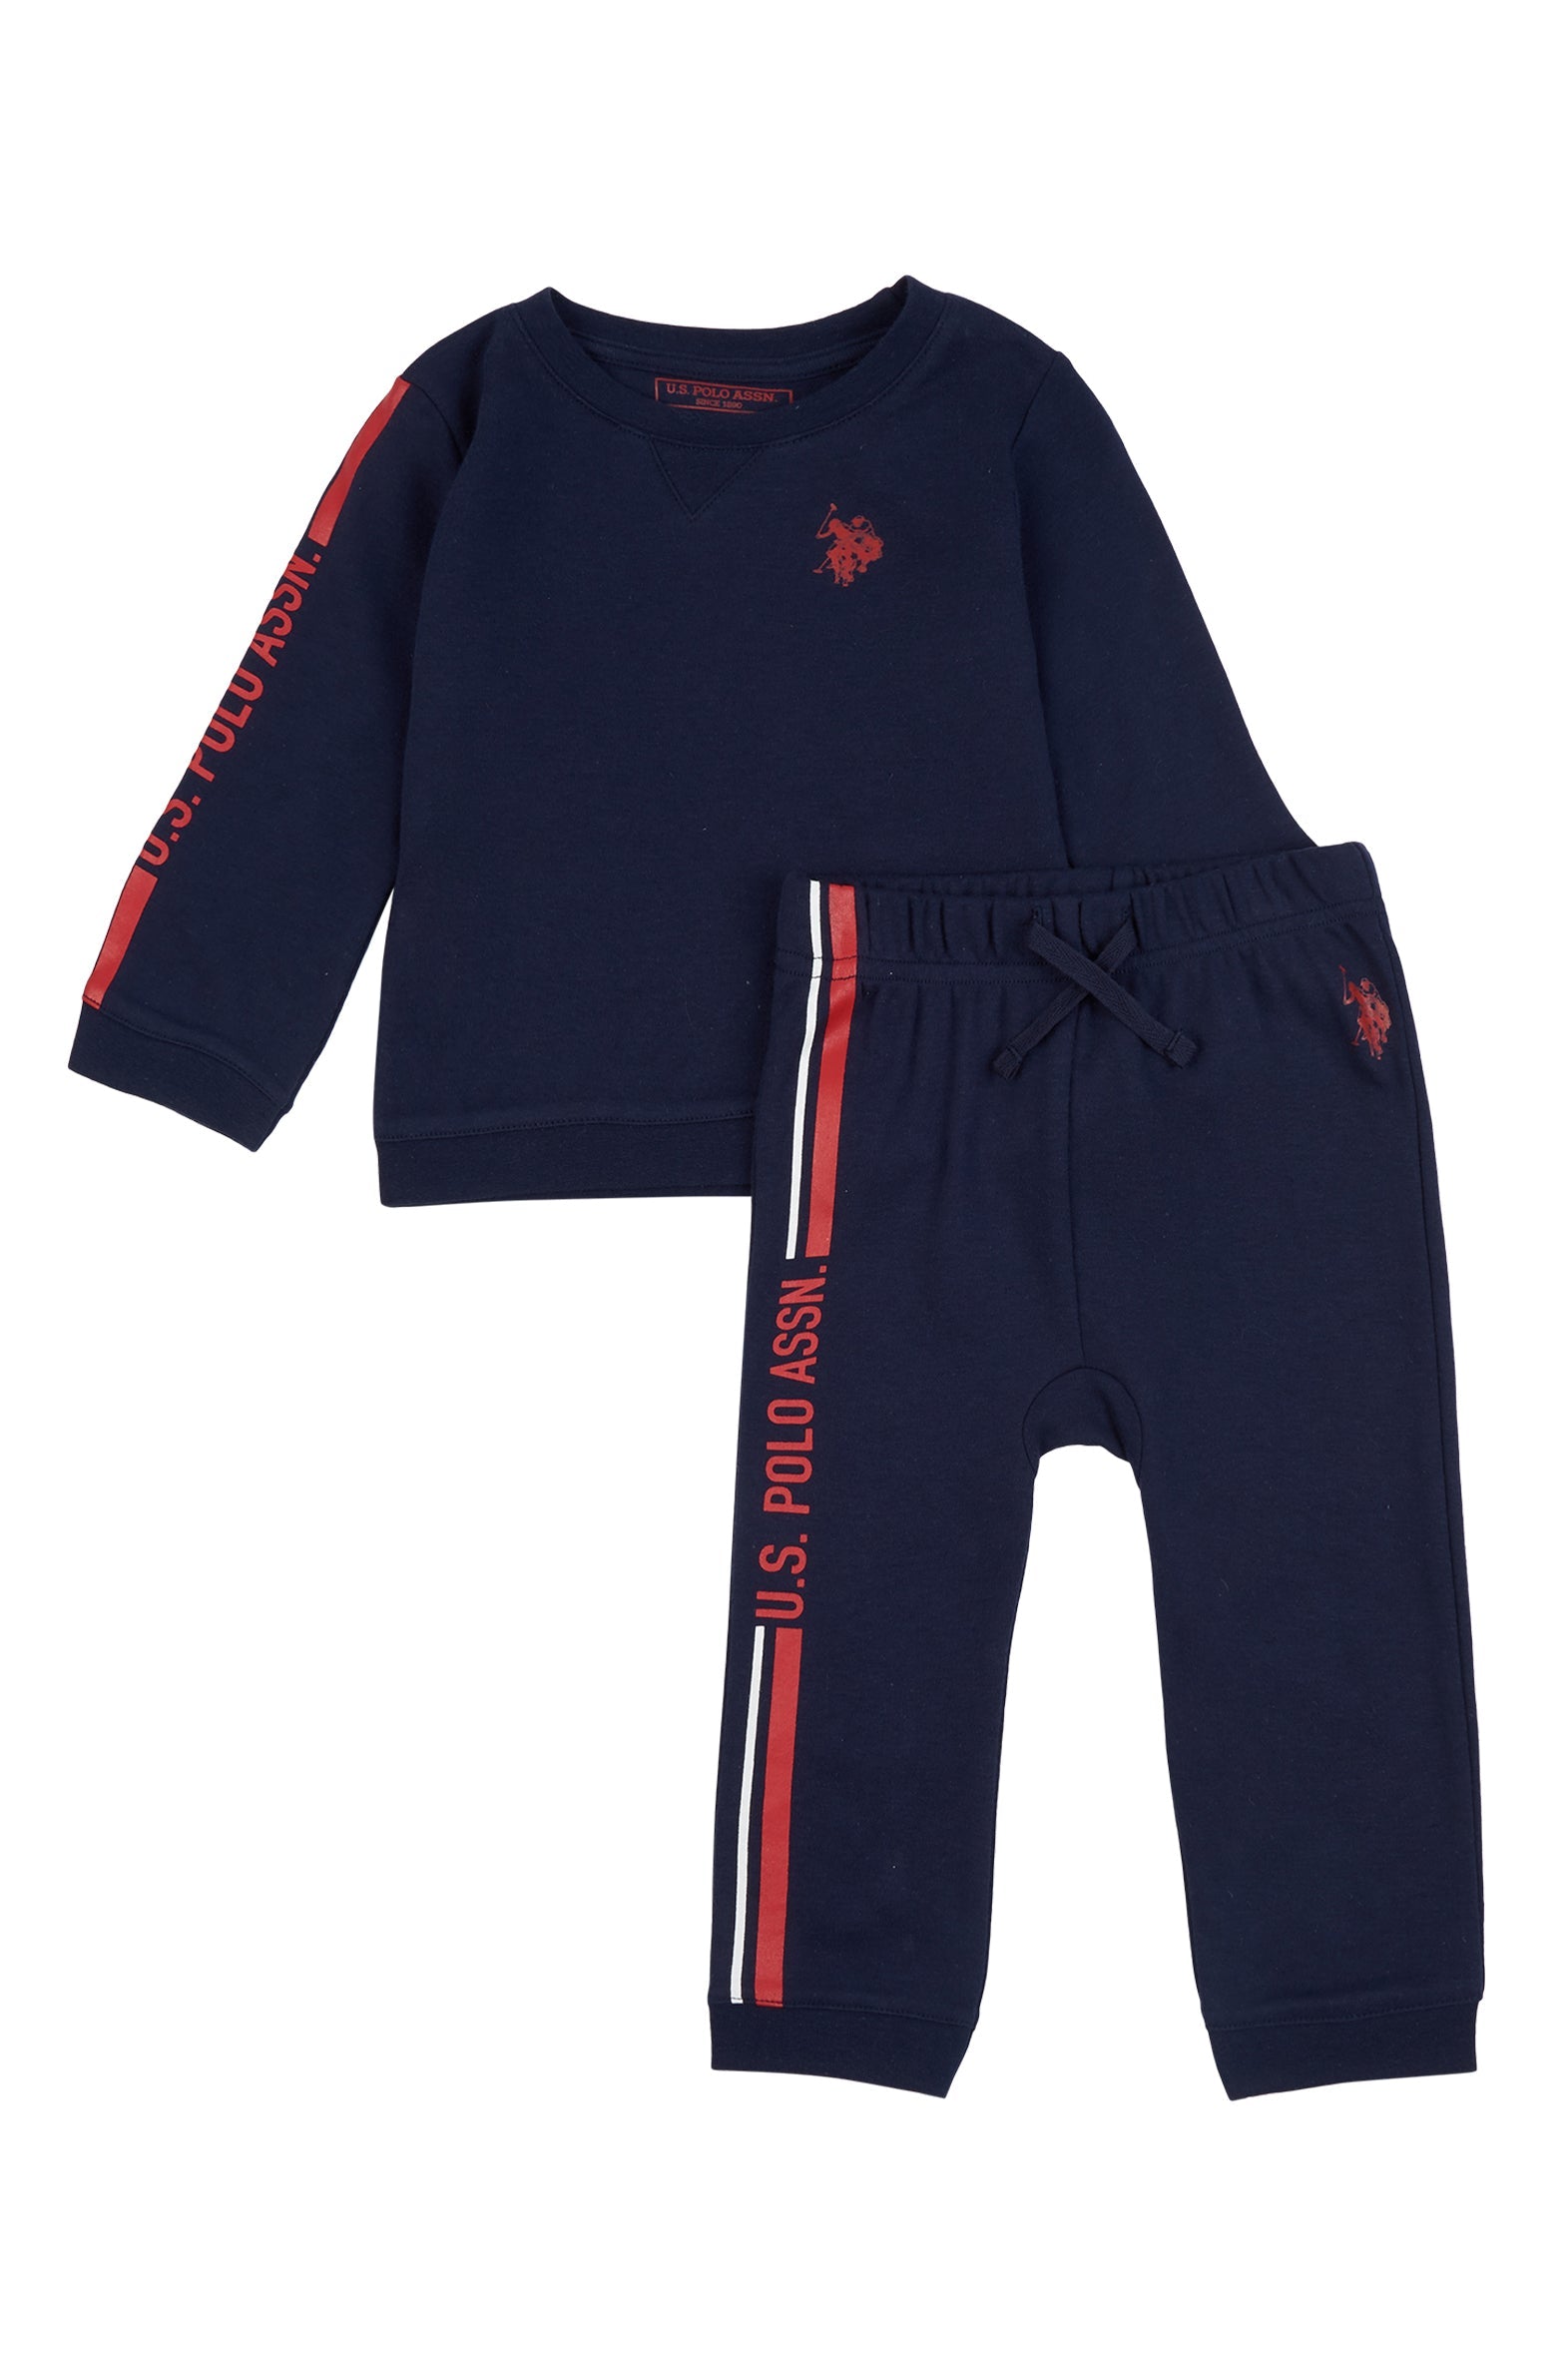 U.S. Polo Assn. Baby Side Graphic Sweatshirt and Joggers Set in Navy Blue